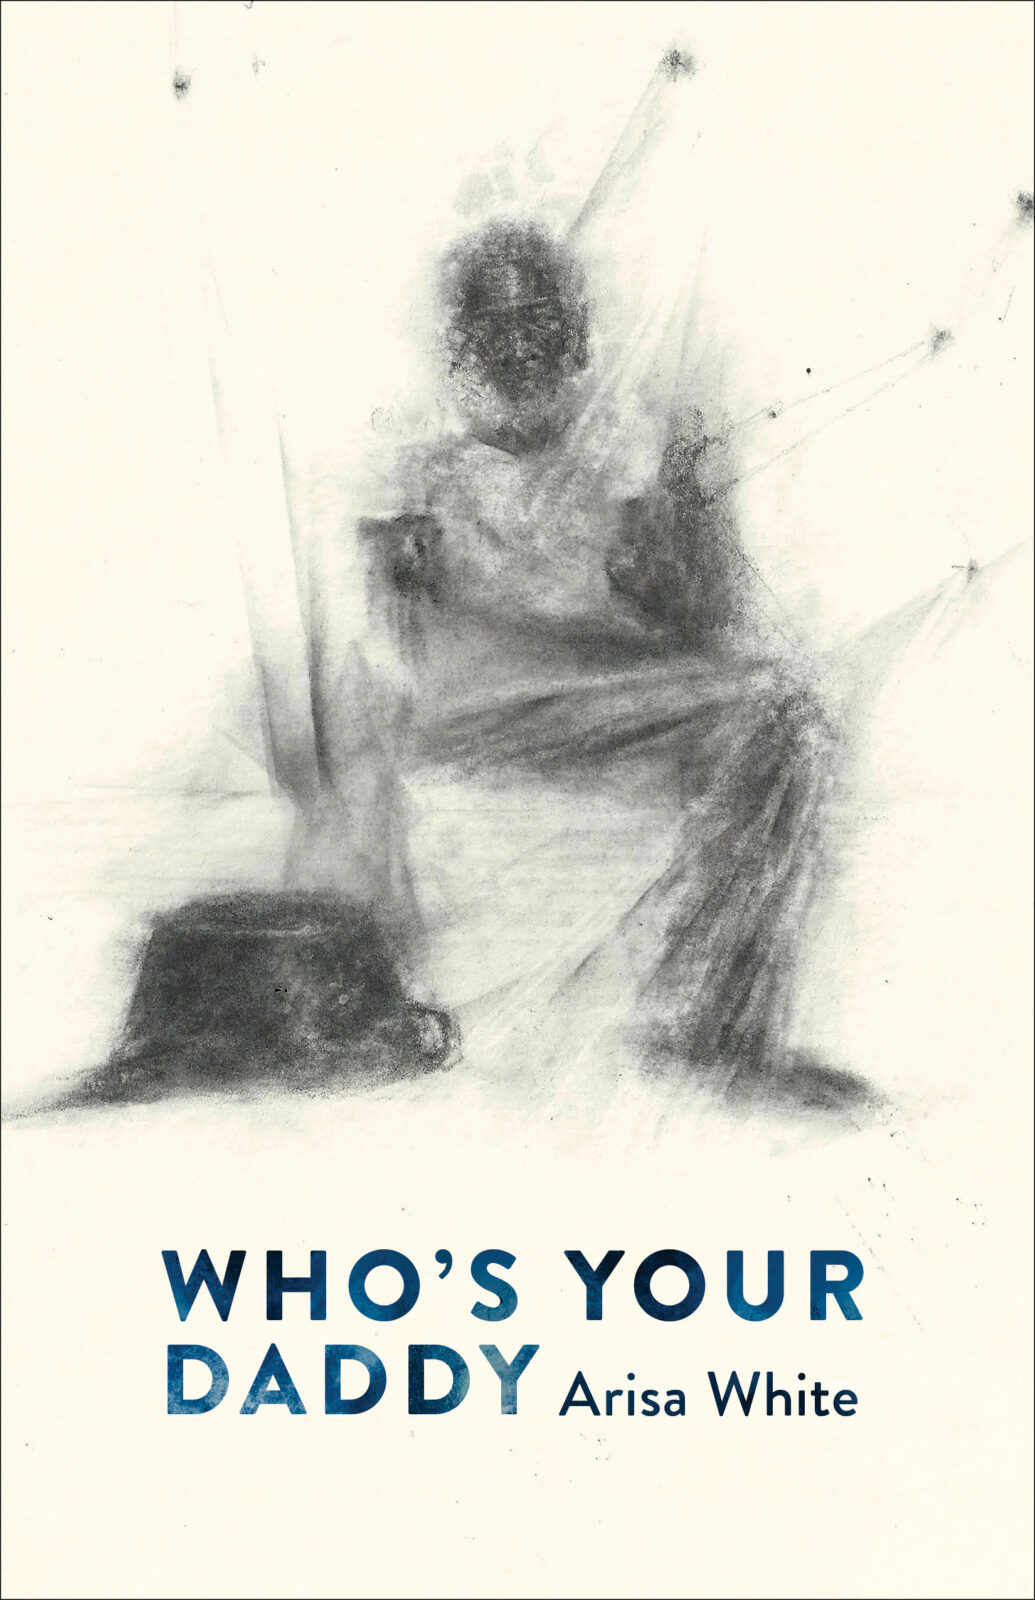 Rumpus Exclusive: Cover Reveal for “Who’s Your Daddy”